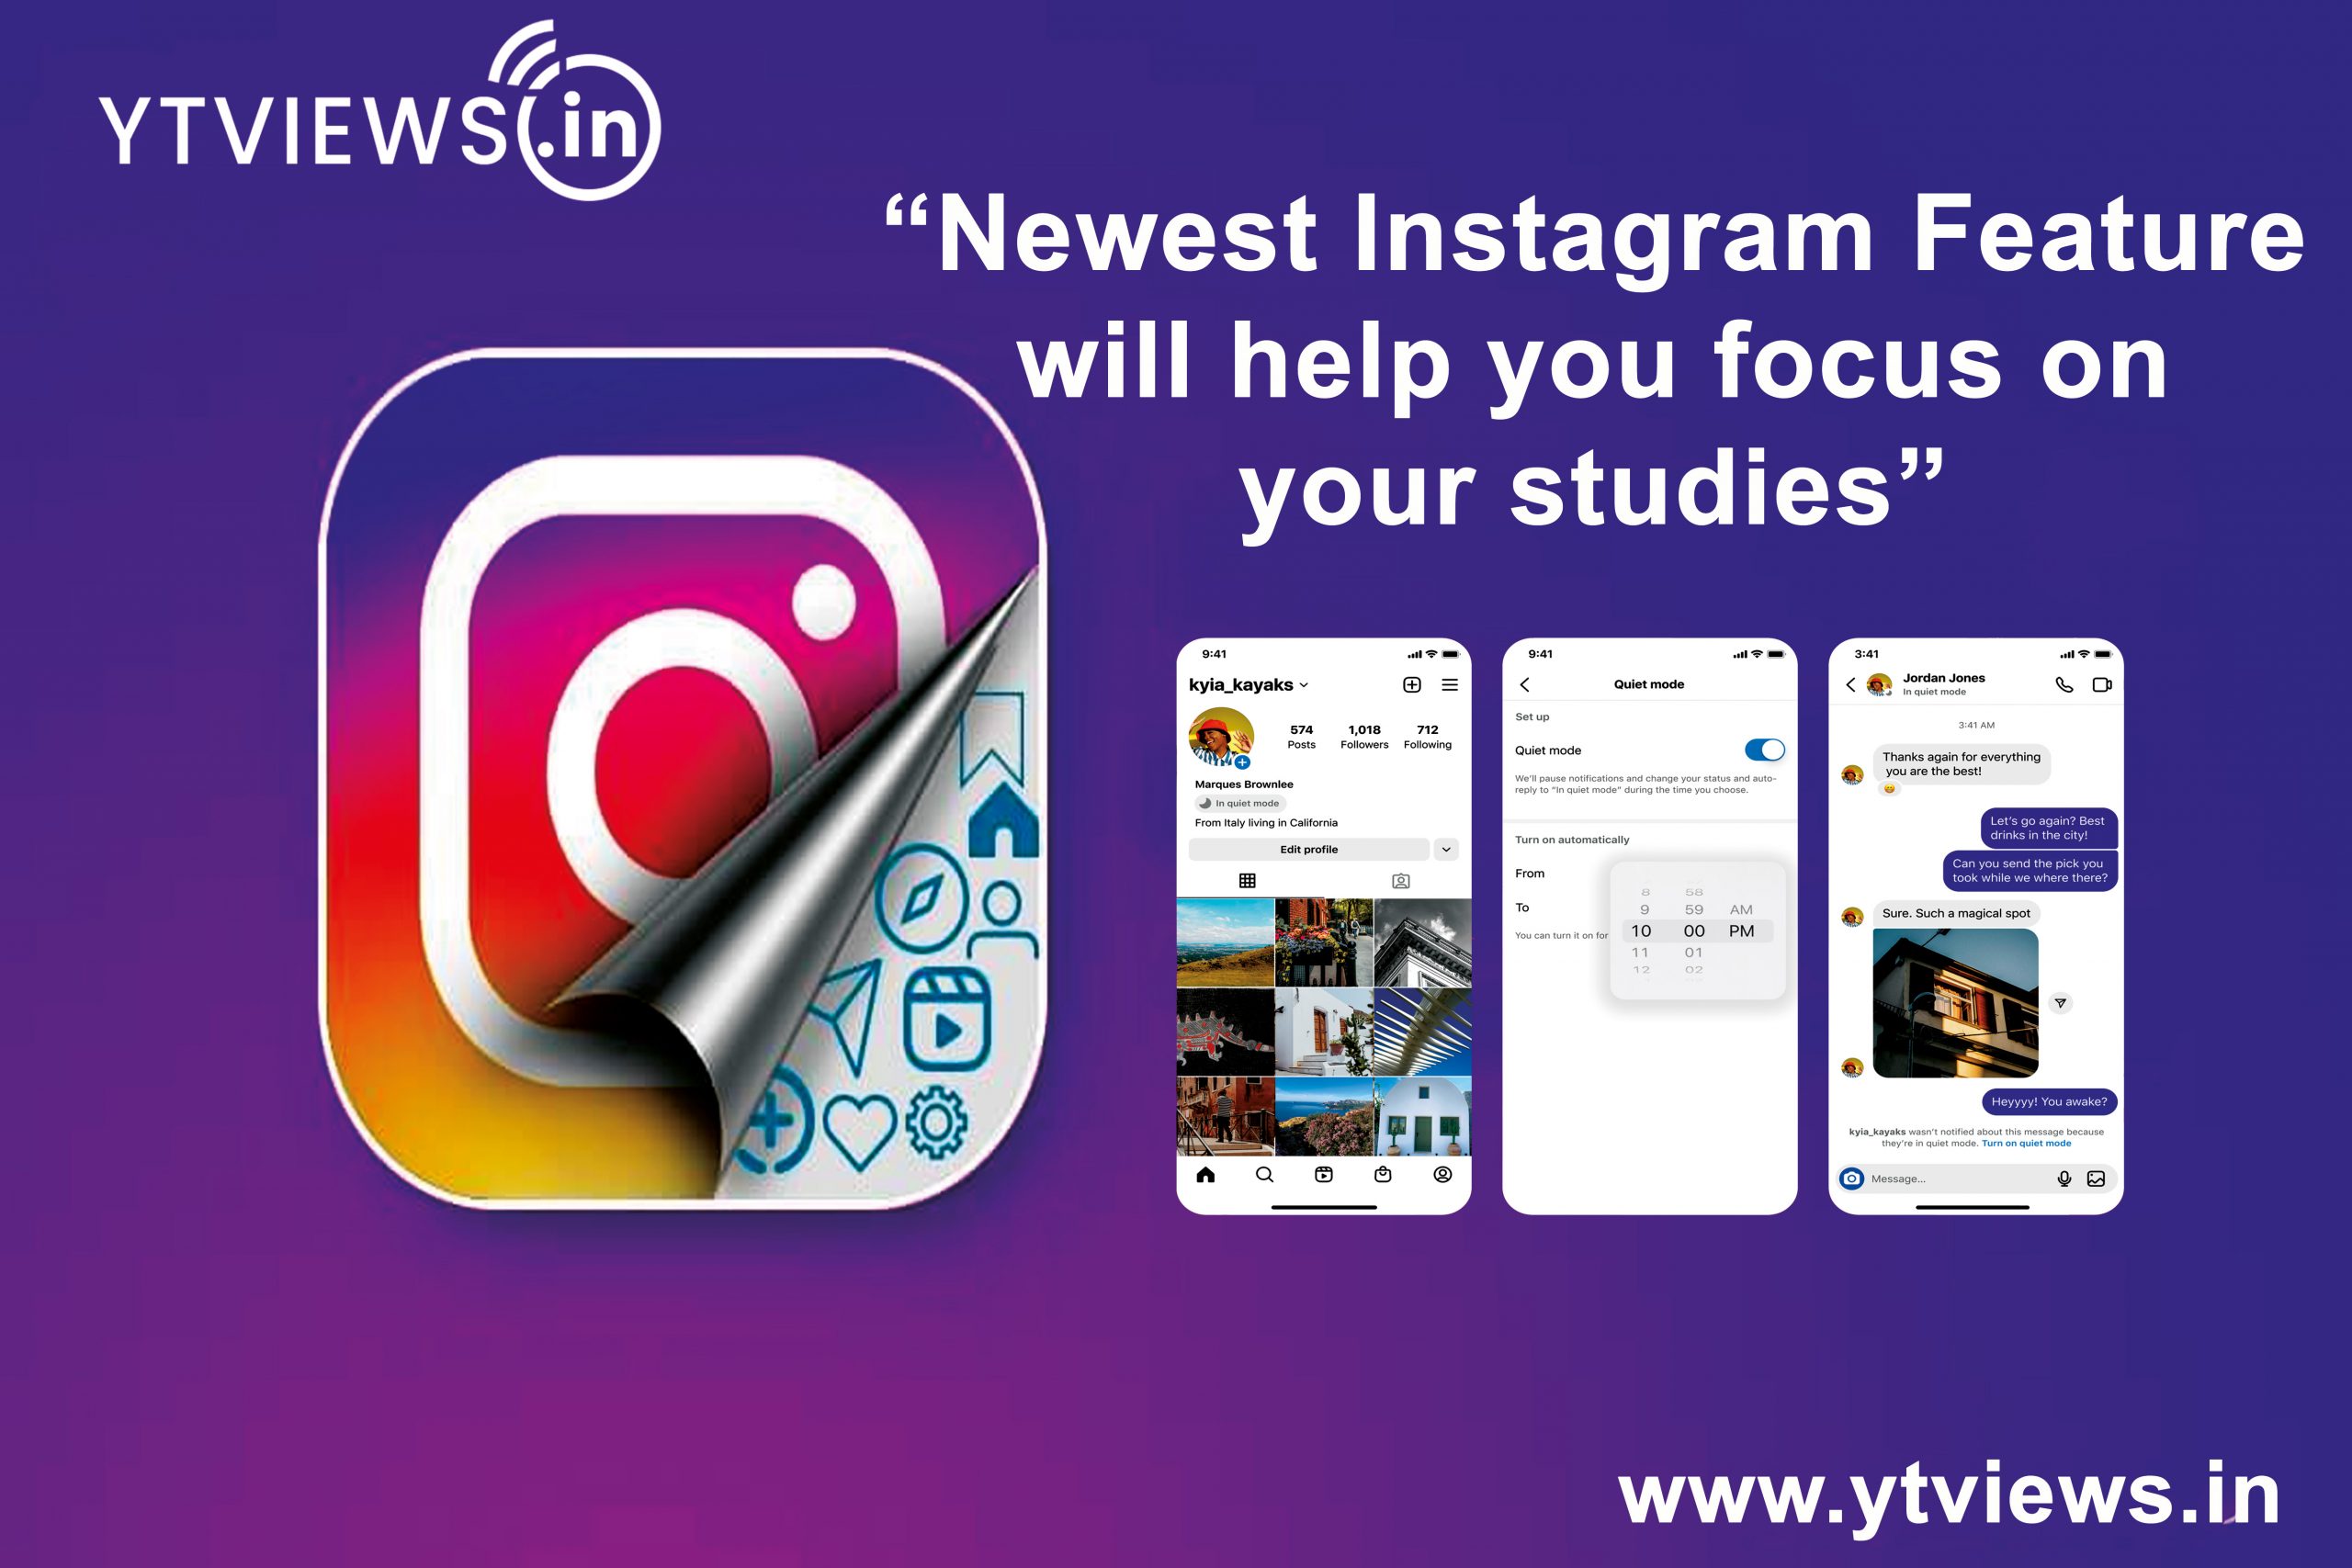 Newest Instagram feeature will help you focus on your studies